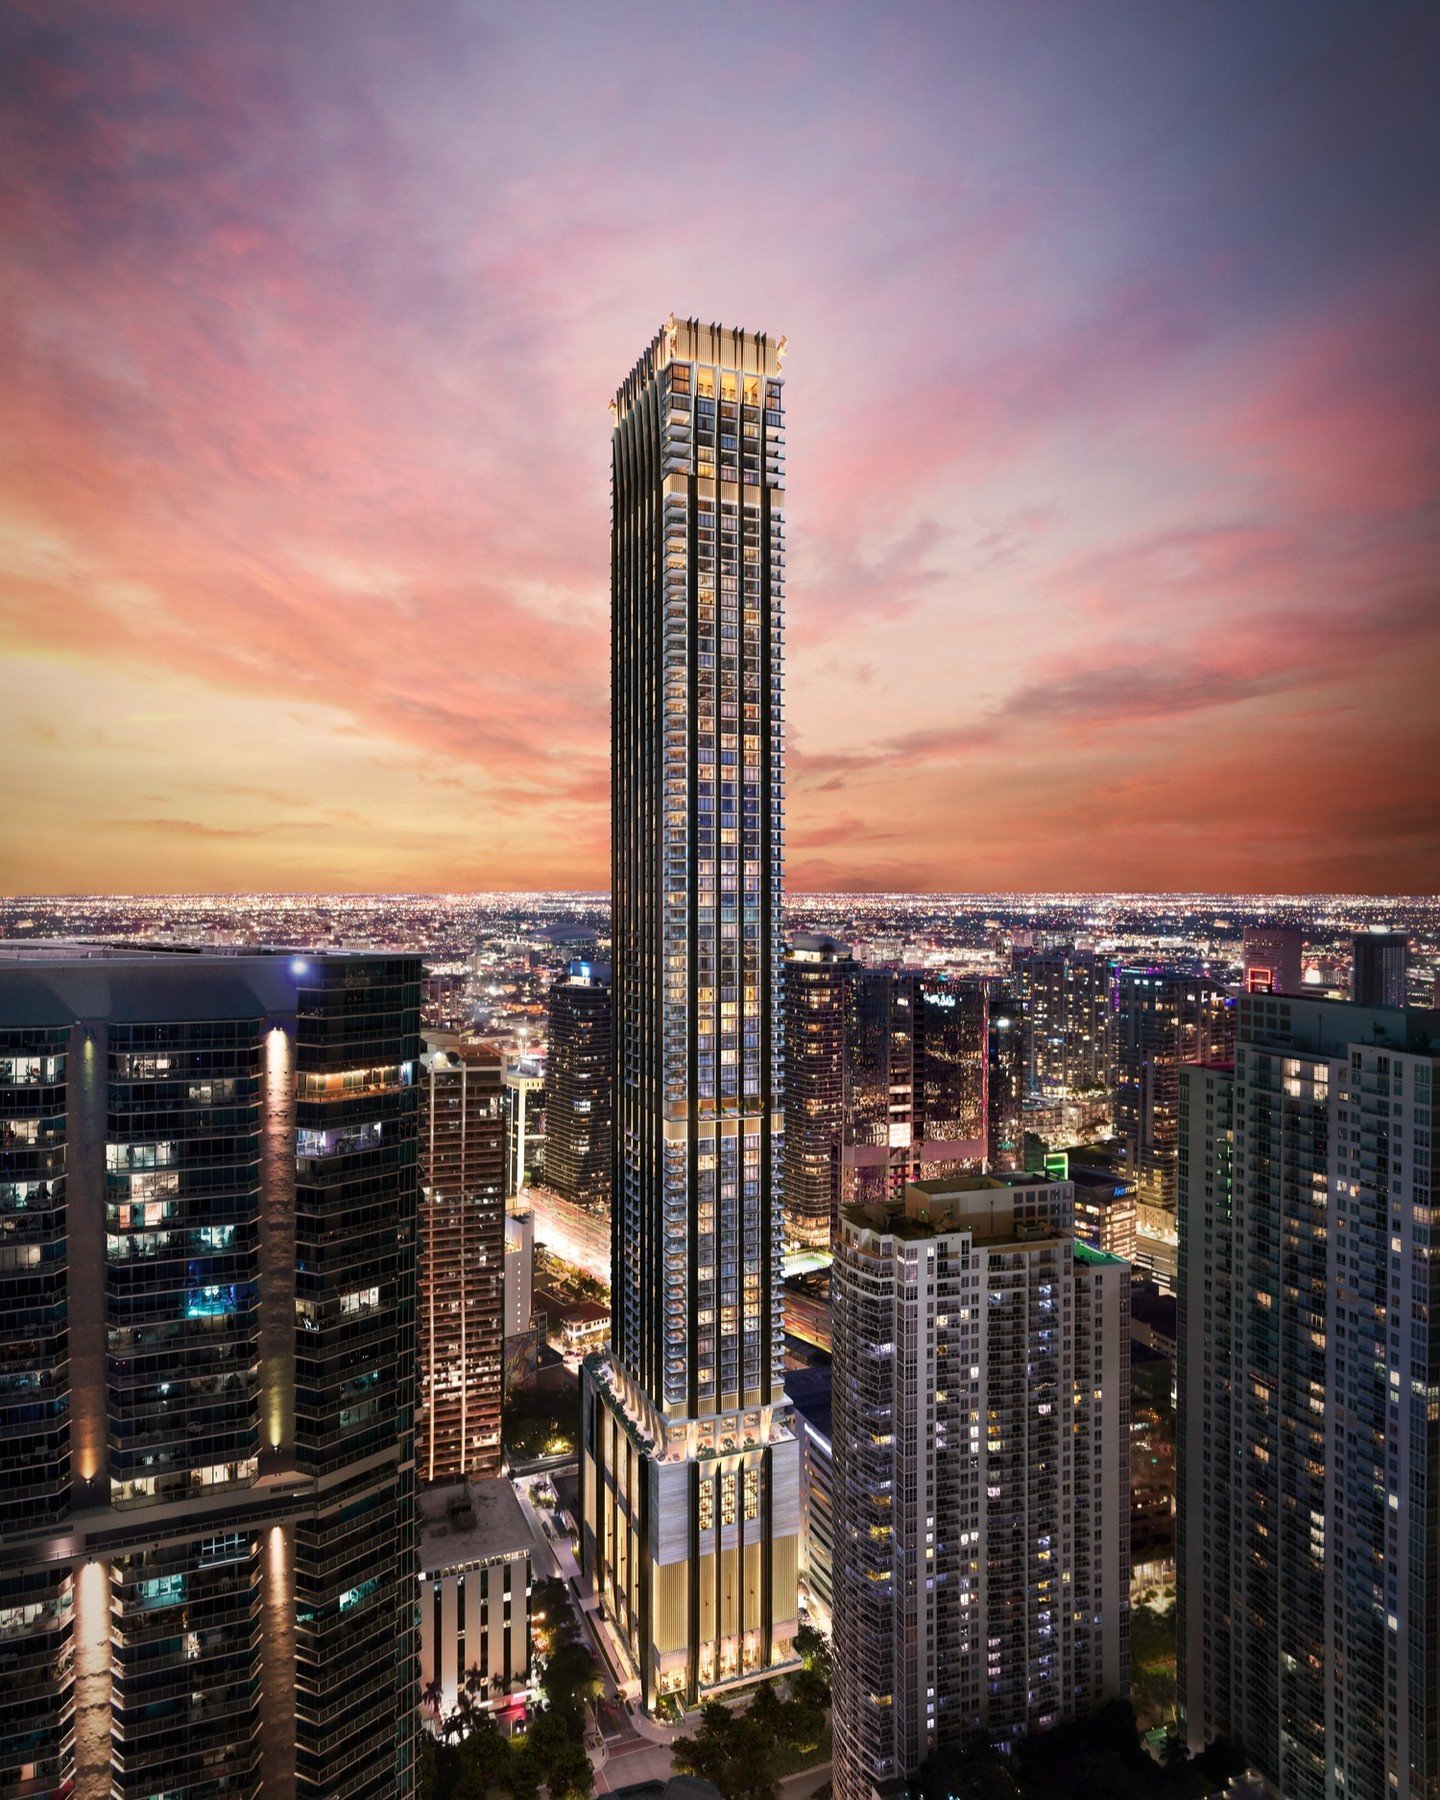 In association with developer JDS Development Group, Dolce &amp; Gabbana has announced fresh design and features regarding flexible homes at 888 Brickell, its first real estate project and condo hotel in the USA. 

Dolce &amp; Gabbana&rsquo;s Grand R